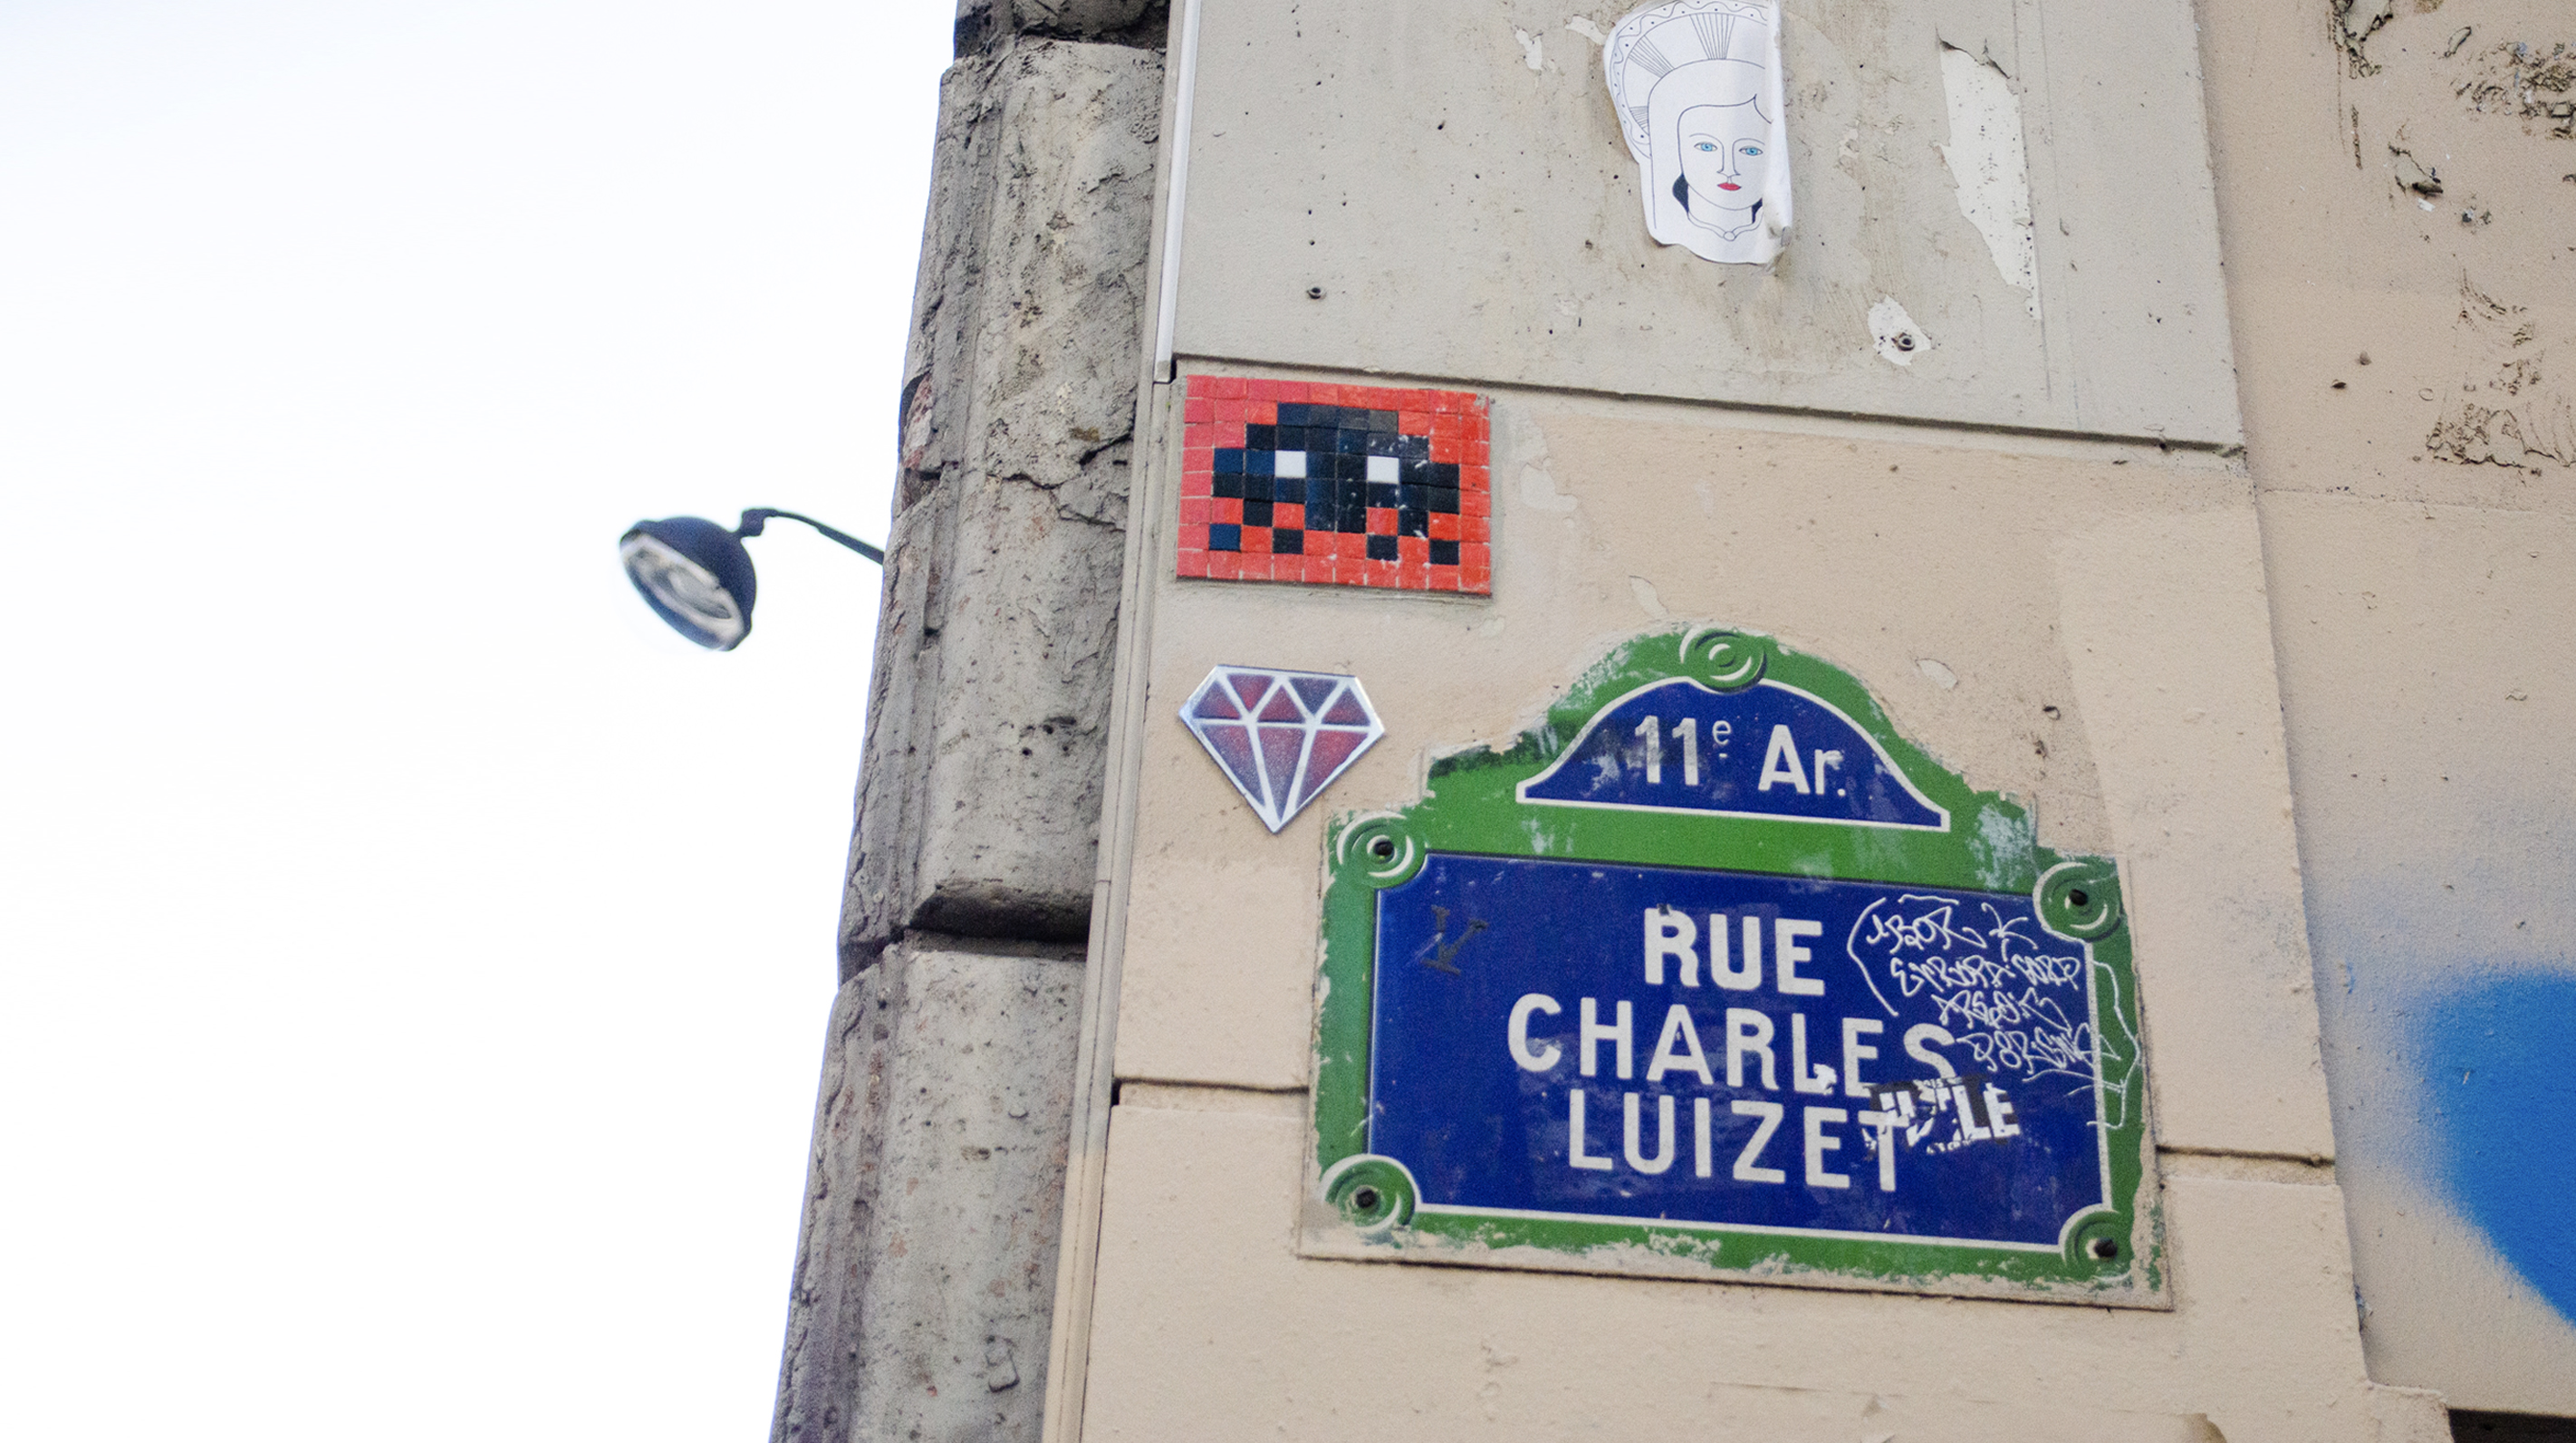 Invader chasing in the streets of Paris!